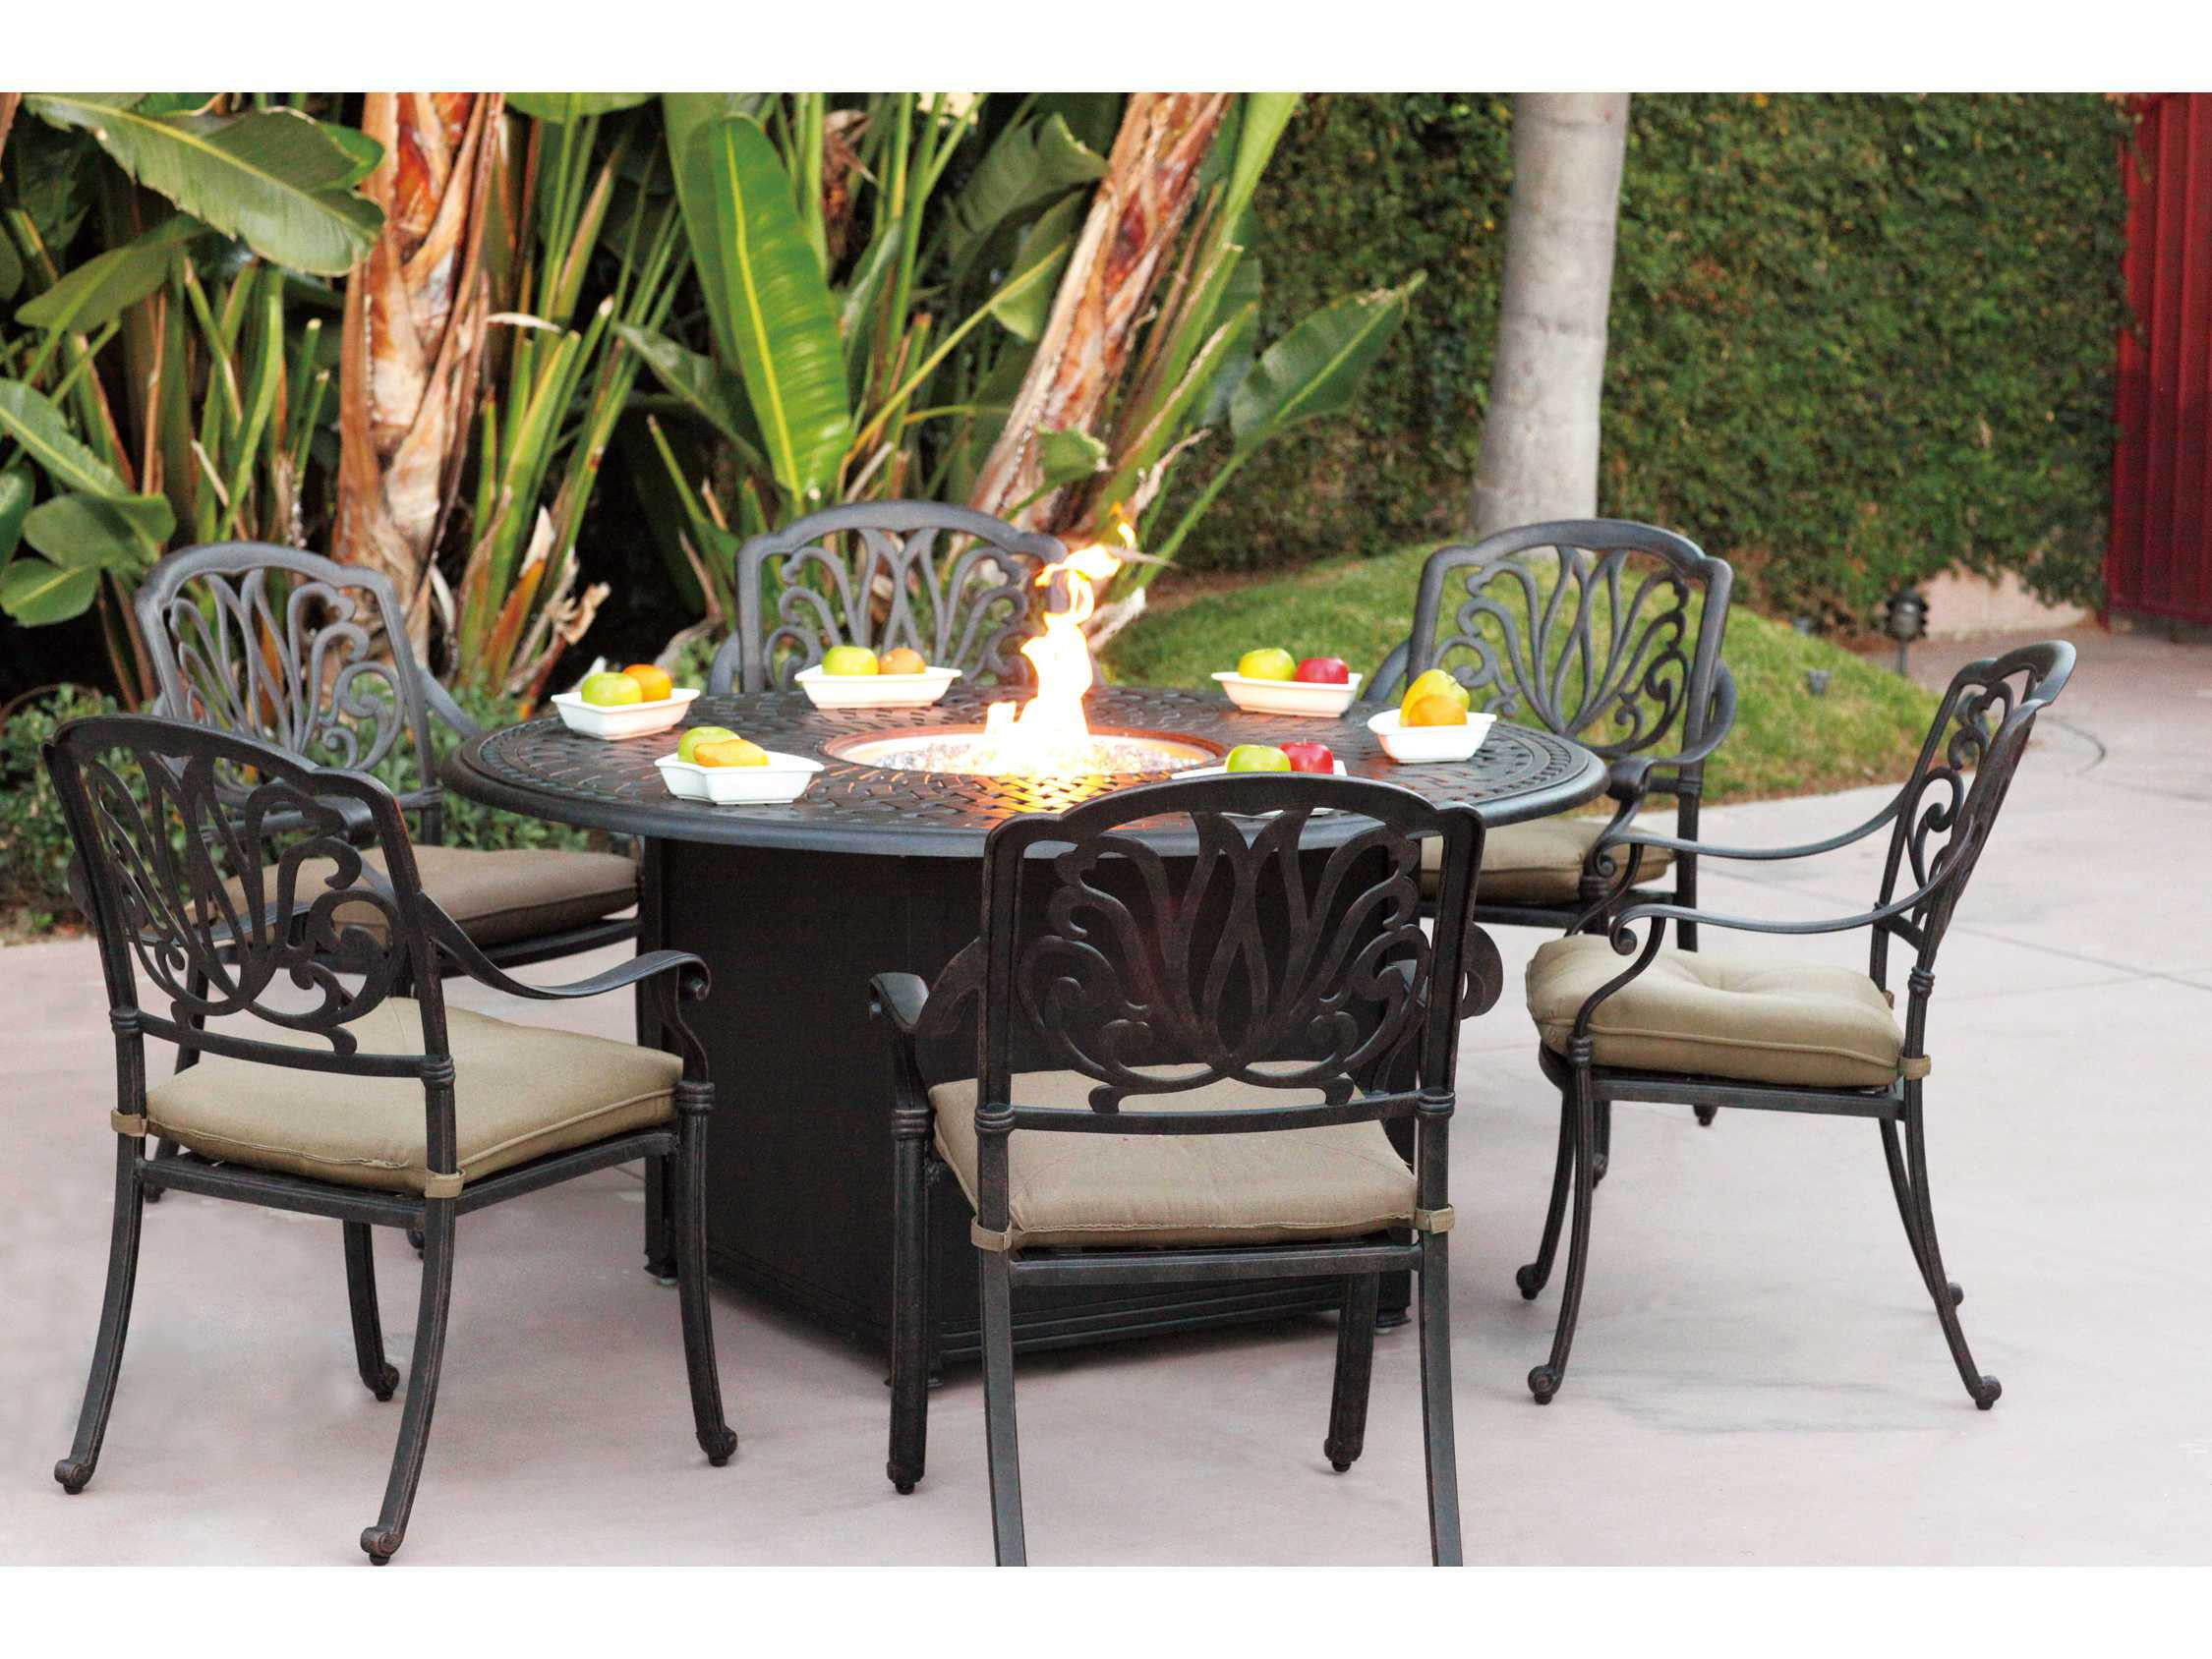 22 Incredible Fire Pit Dining Table - Home, Family, Style and Art Ideas